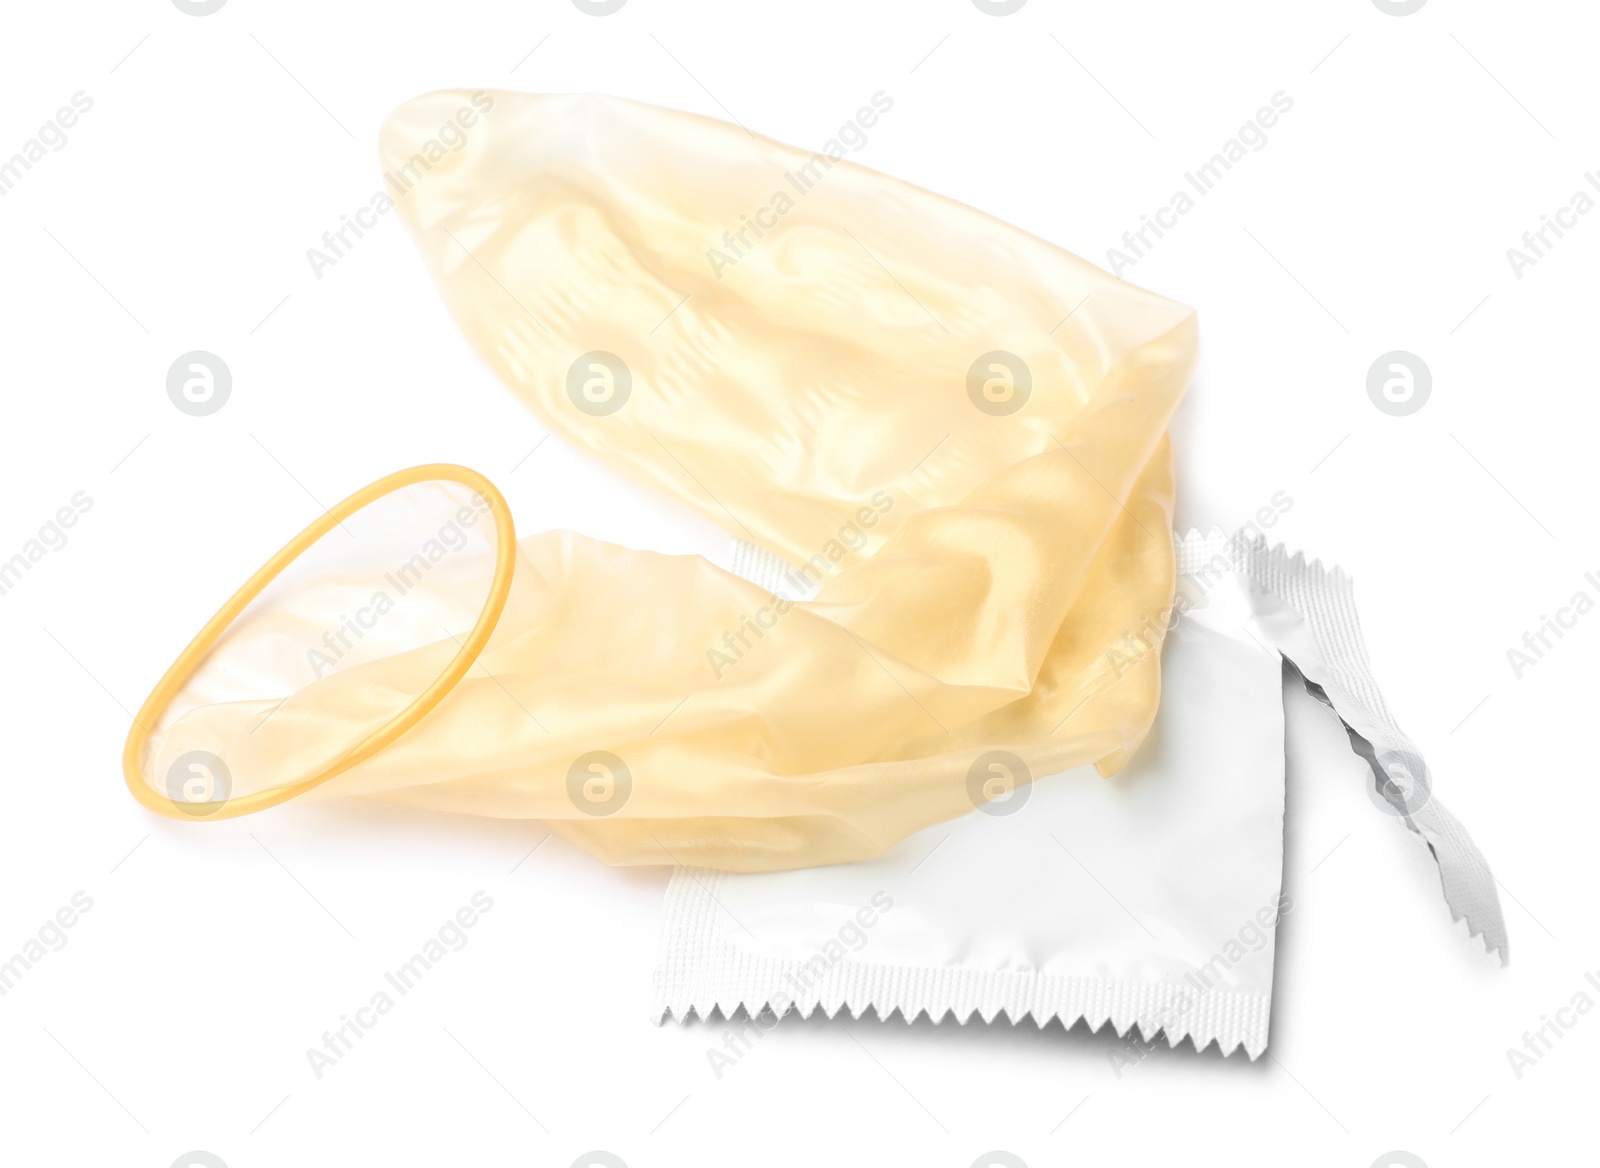 Image of Unrolled condom and package on white background. Safe sex